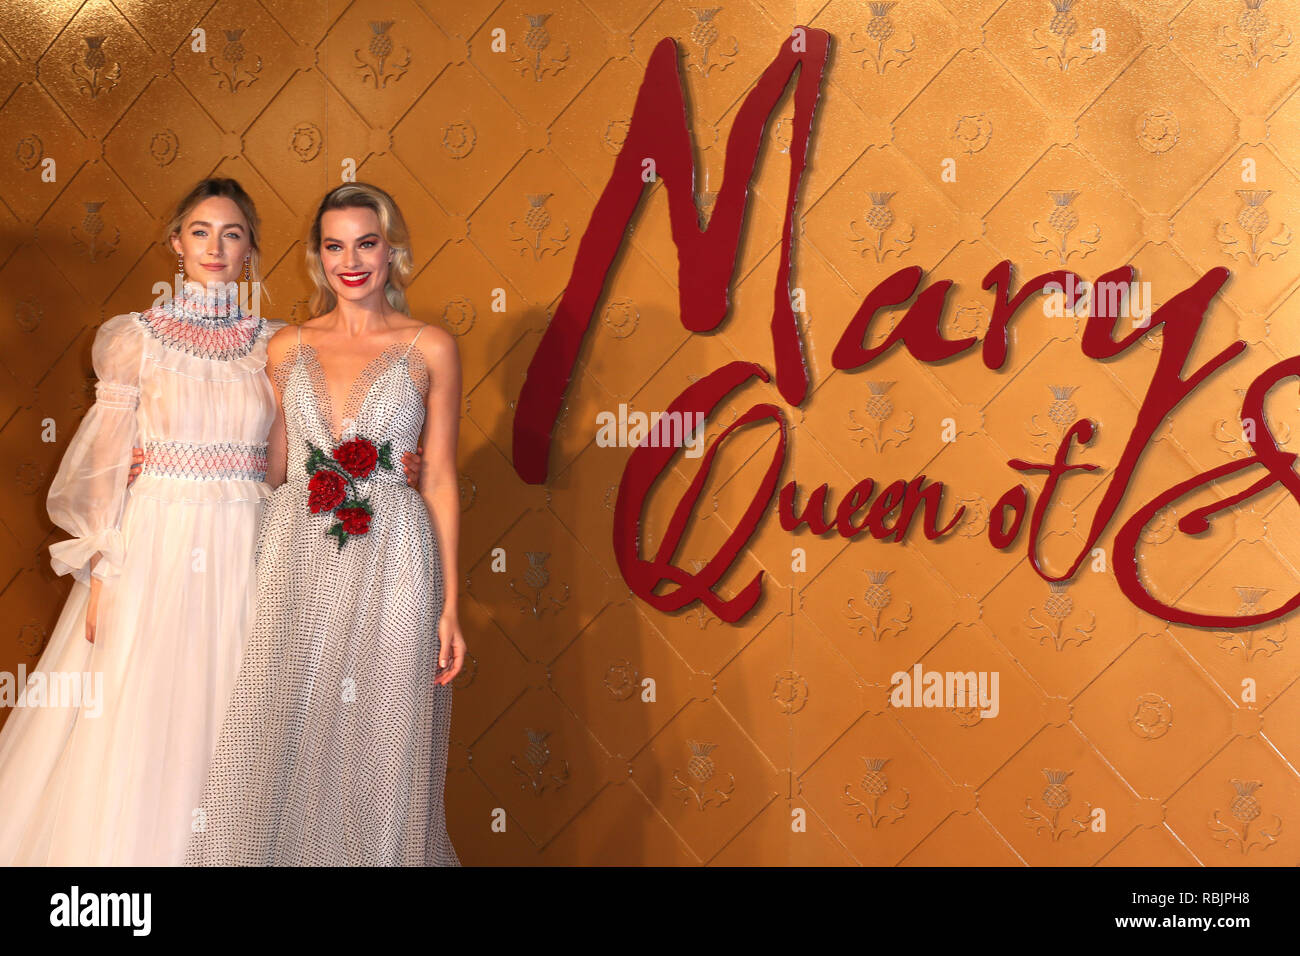 The World Premiere of 'Mary Queen Of Scots' held at the Cineworld Leicester Square - Arrivals  Featuring: Saoirse Ronan, Margot Robbie Where: London, United Kingdom When: 10 Dec 2018 Credit: Mario Mitsis/WENN.com Stock Photo